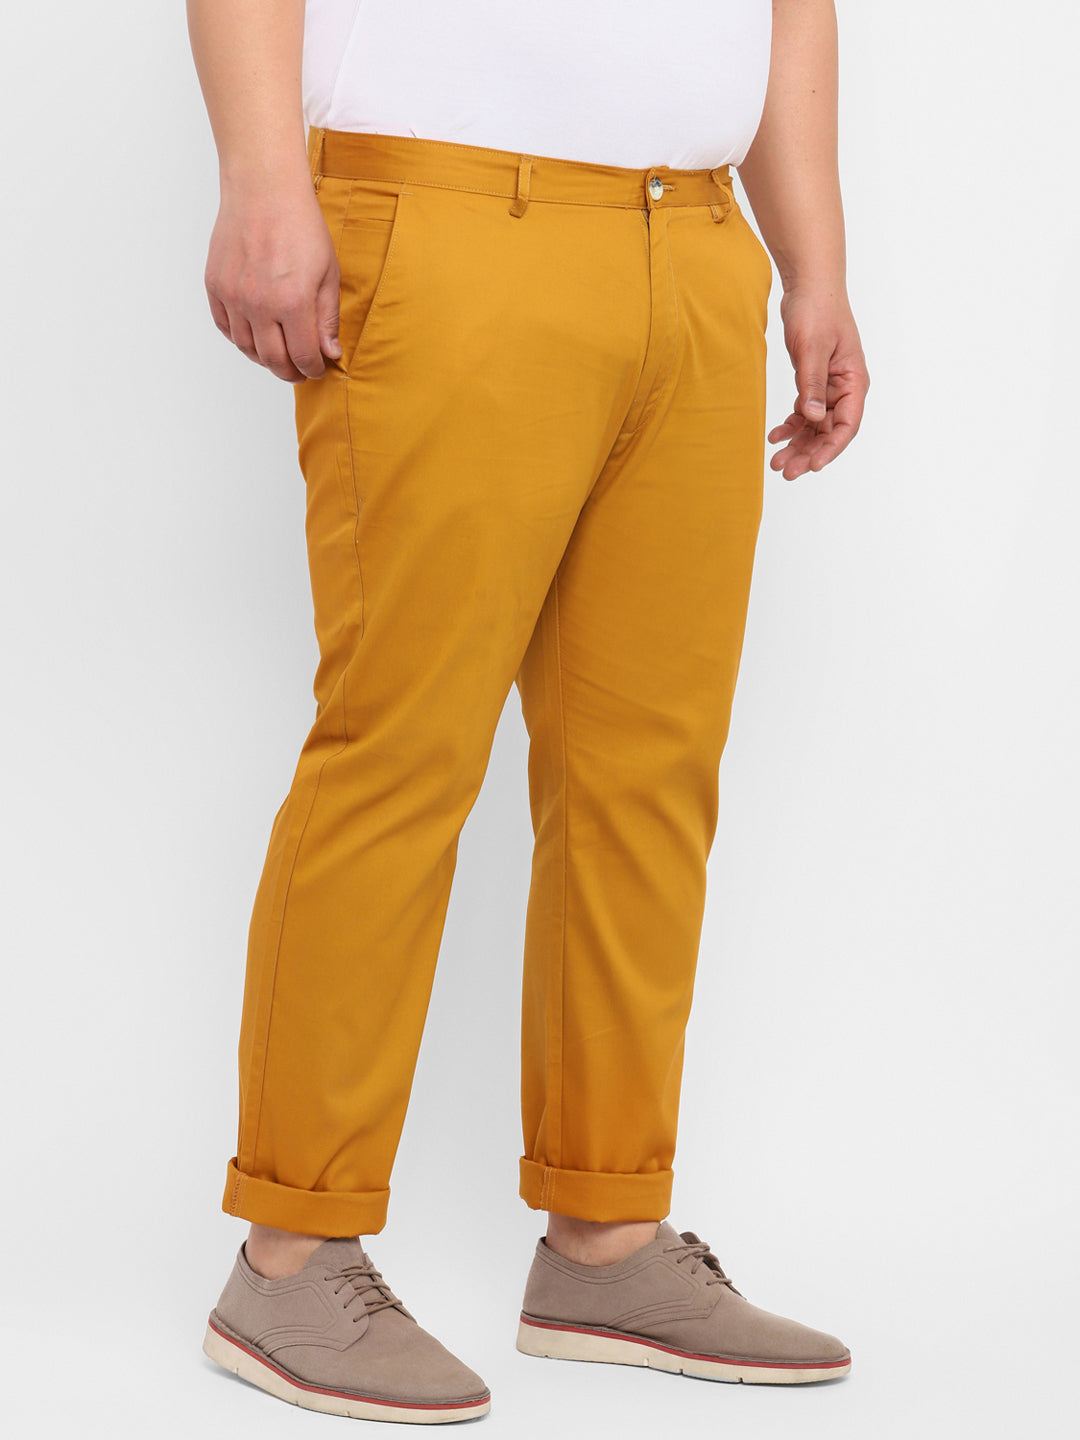 Urbano Plus Men's Yellow Cotton Light Weight Non-Stretch Regular Fit Casual Trousers